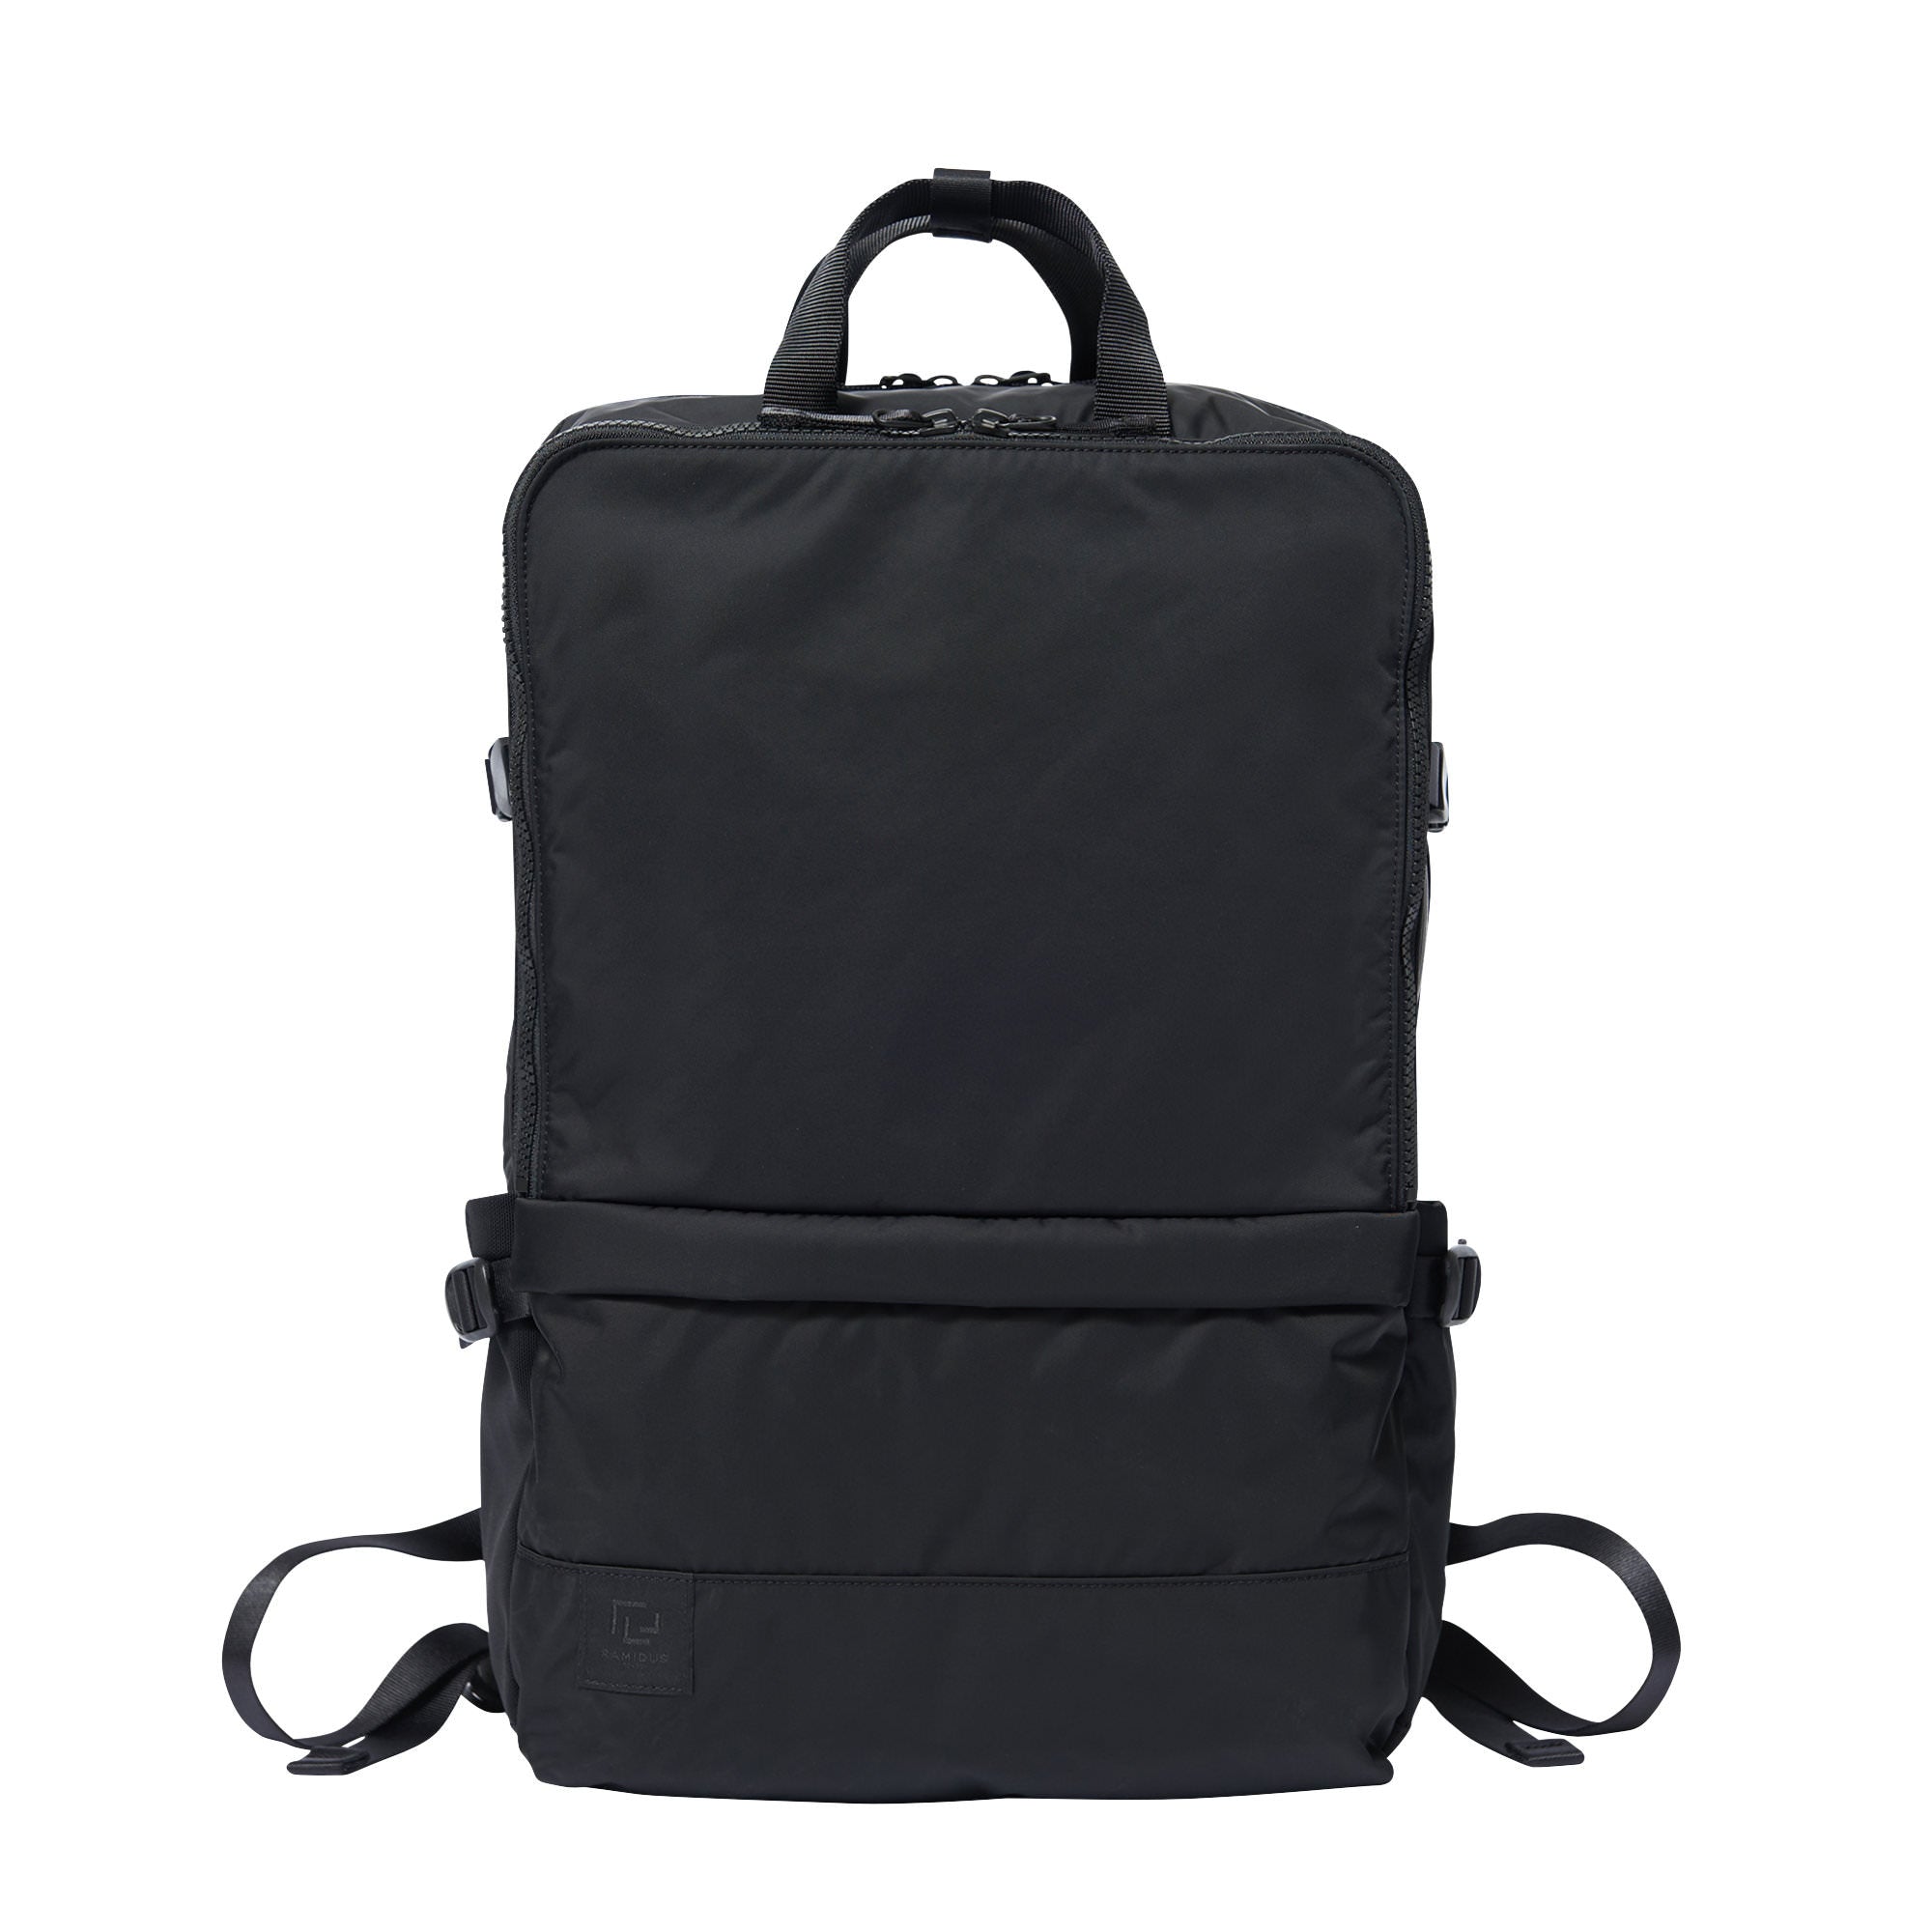 WeightRAMIDUS BLACK BEAUTY LAPTOP DAY PACK